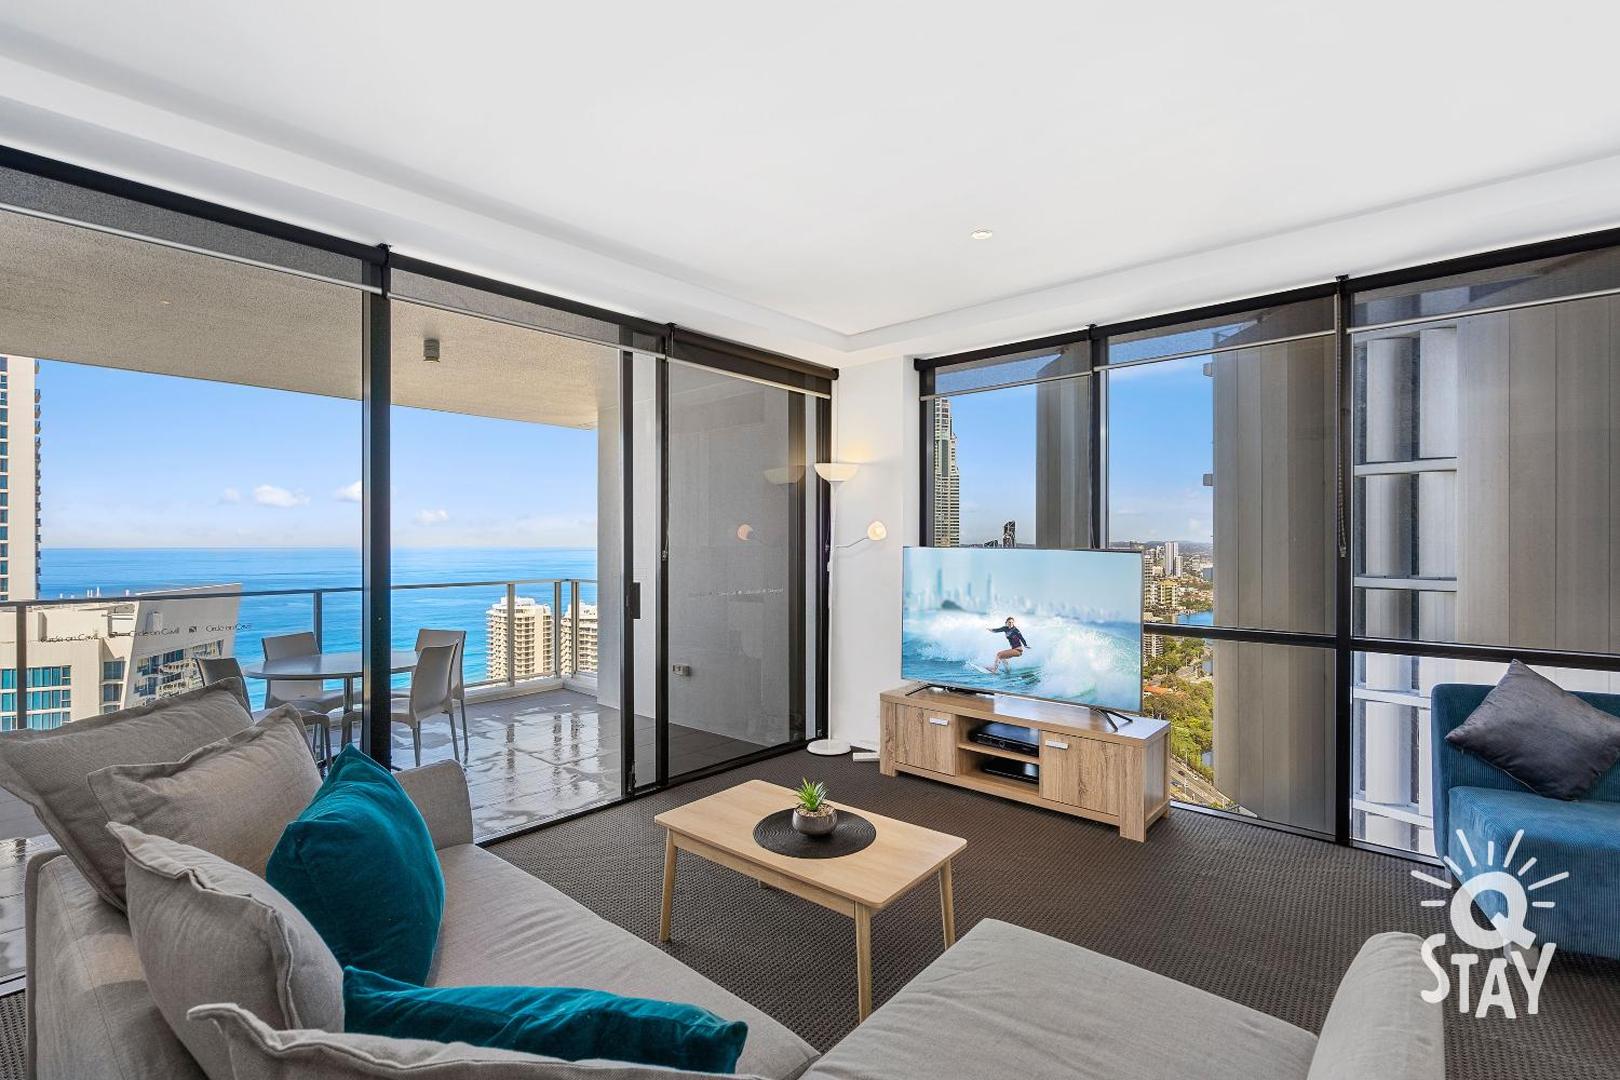 Circle on Cavill Surfers Paradise – 2 Bedroom Ocean View on level 40!!